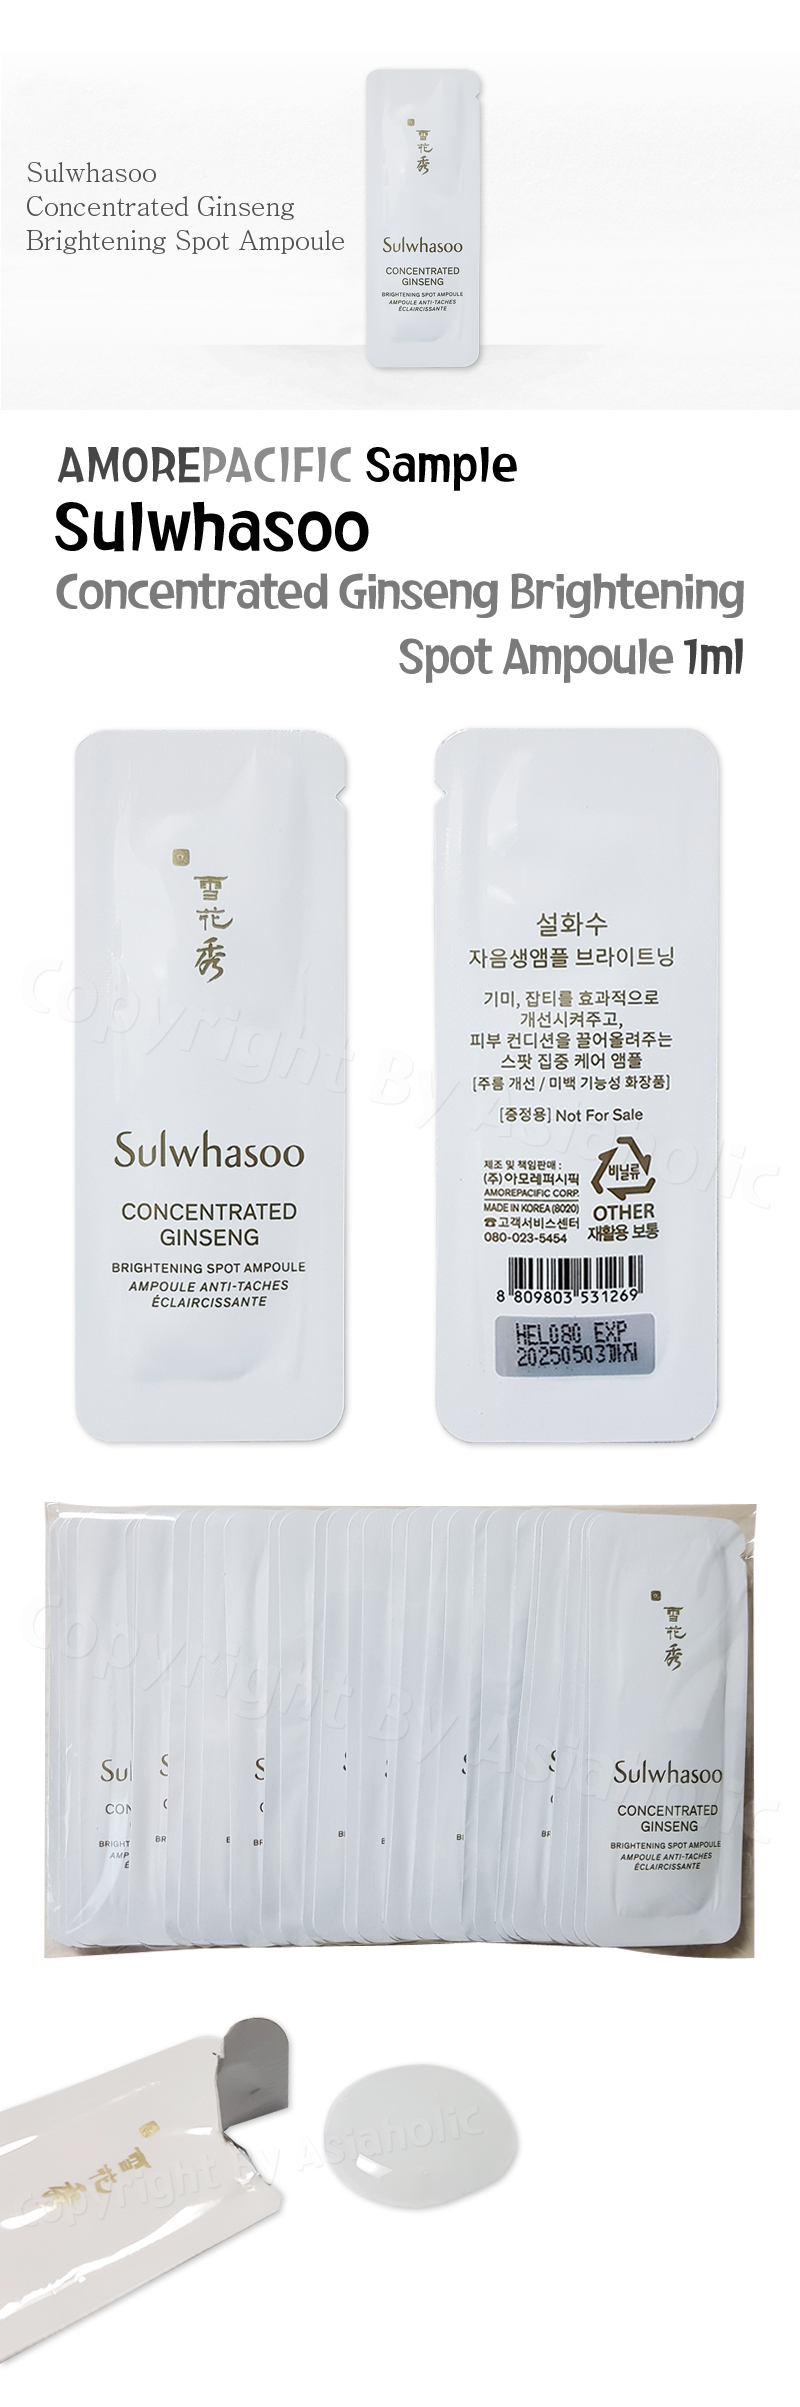 Sulwhasoo Concentrated Ginseng Brightening Spot Ampoule 1ml (10pcs ~ 130pcs) Newest Version